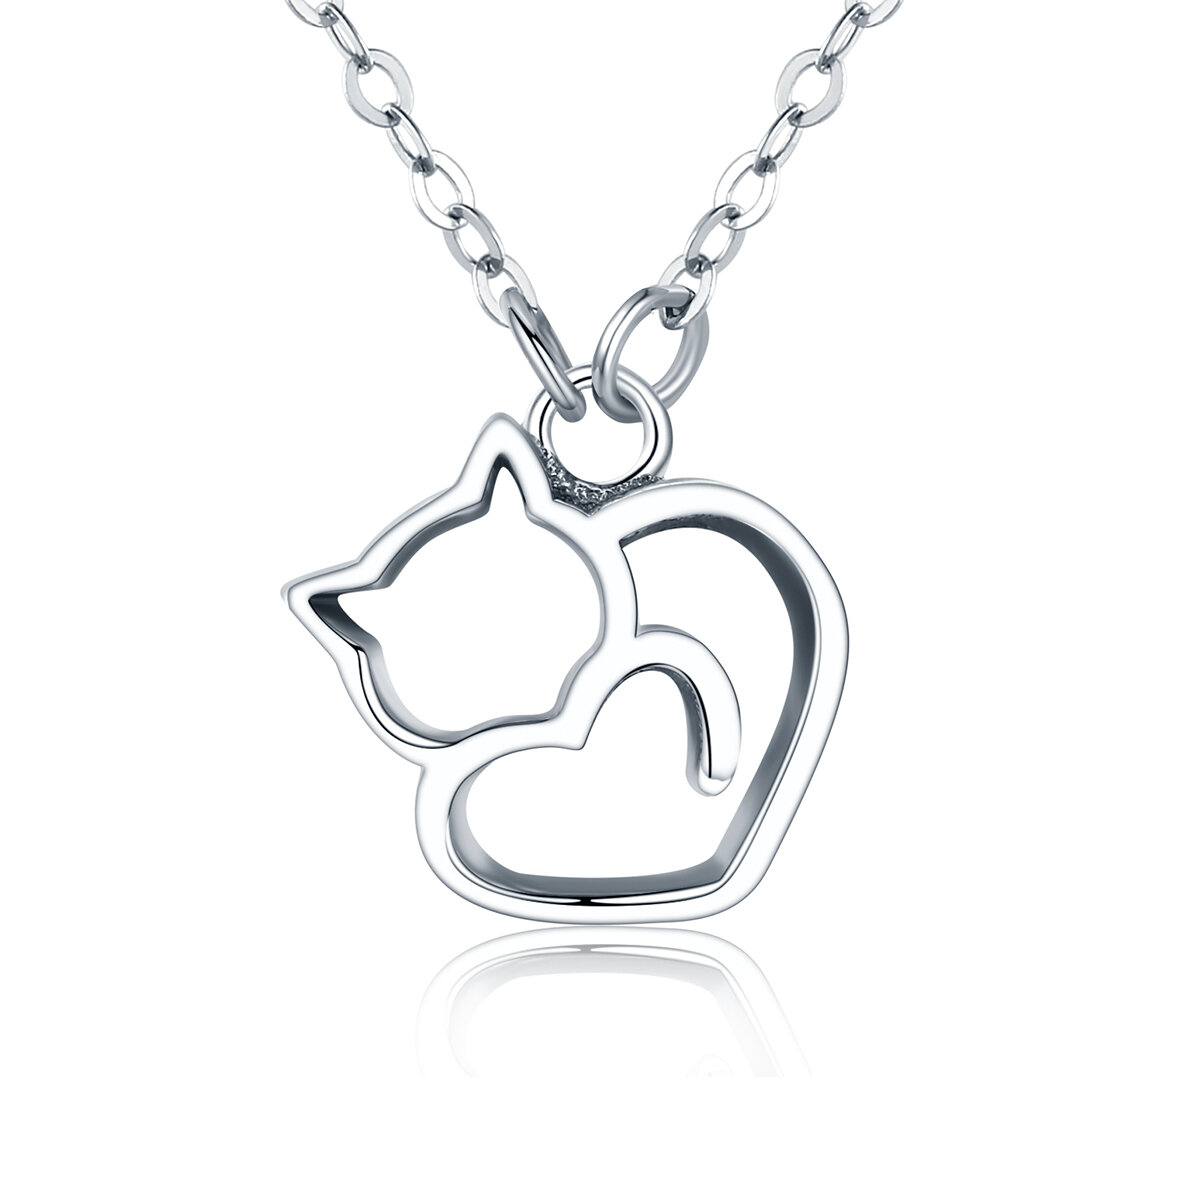 GemKing adorable Cat S925 Sterling Silver Necklace & Earring